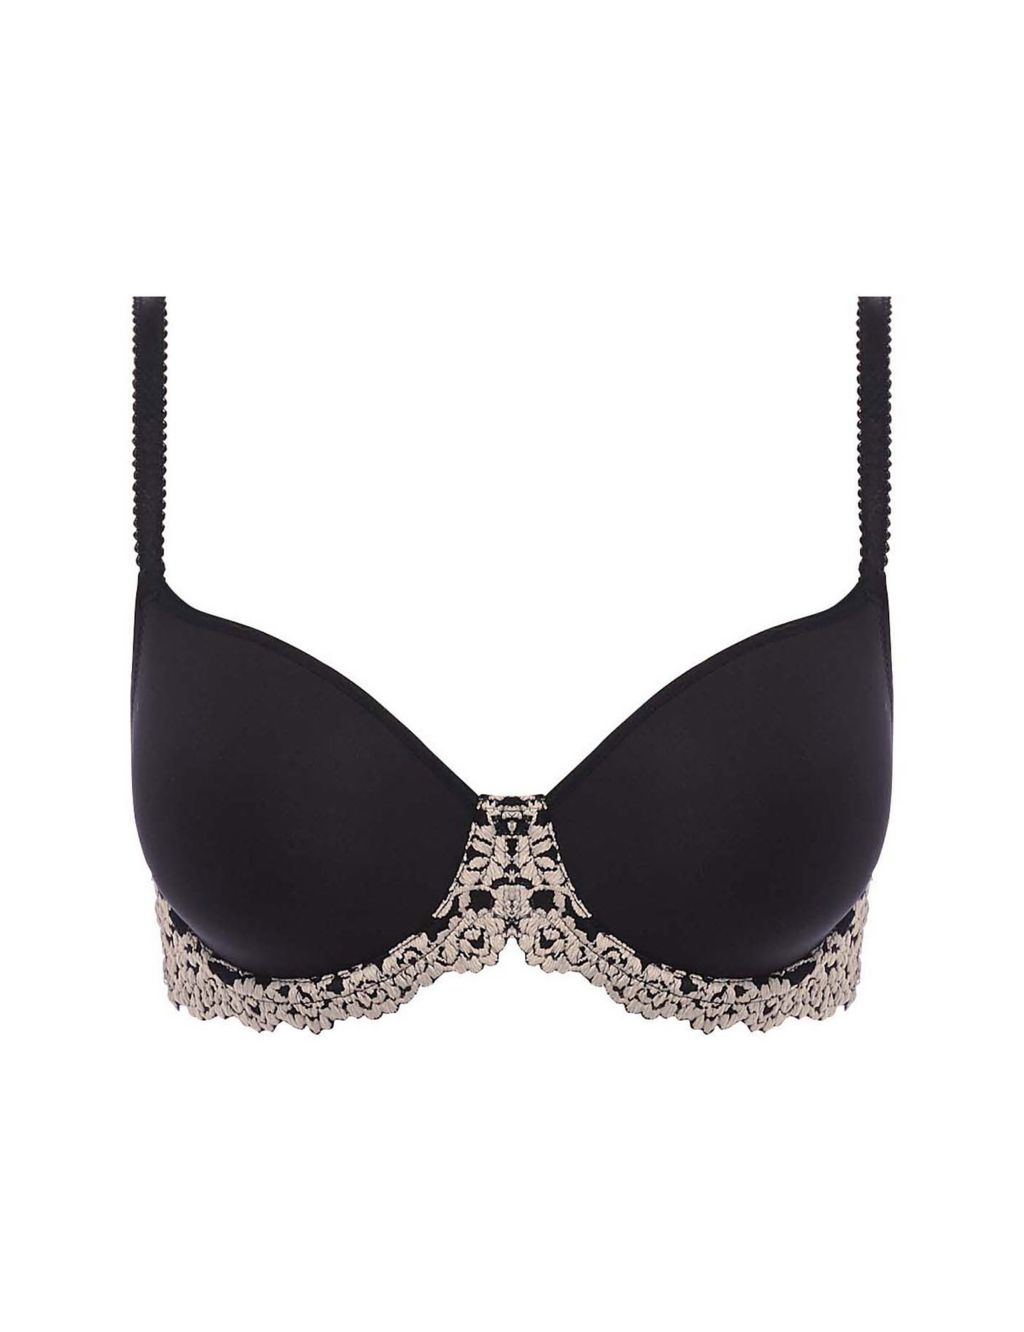 Wacoal Embrace Lace Non Wired Bralette, Black at John Lewis & Partners